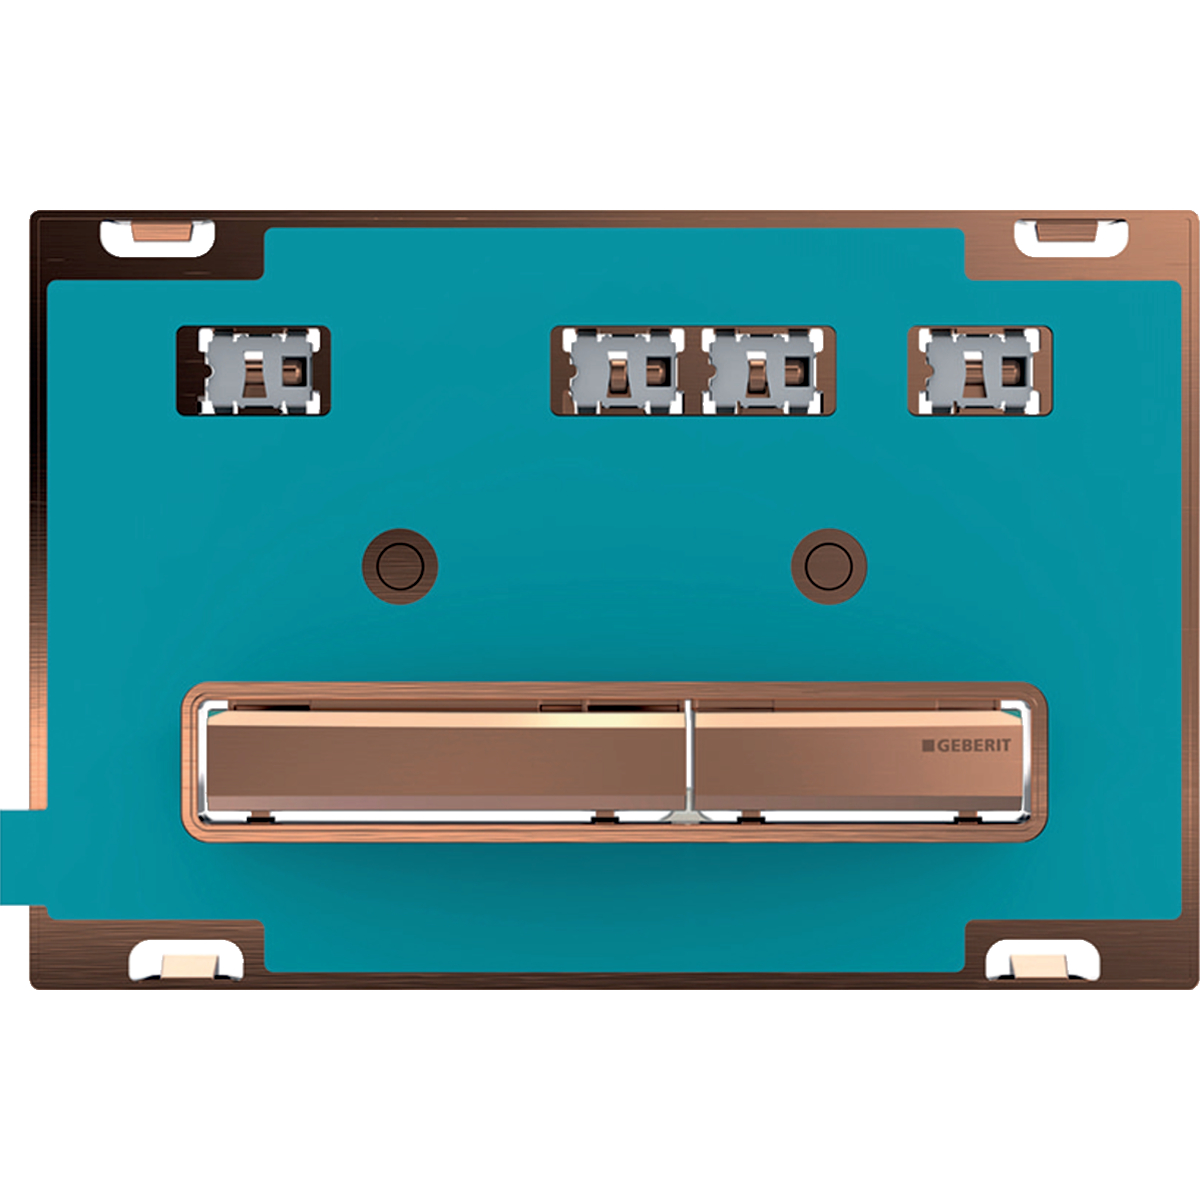 Geberit 115.670.00.2 Actuator Plate Sigma50 for Dual Flush, Metal Colour Red Gold - Base Plate and Buttons: Red Gold/Cover Plate: Customised